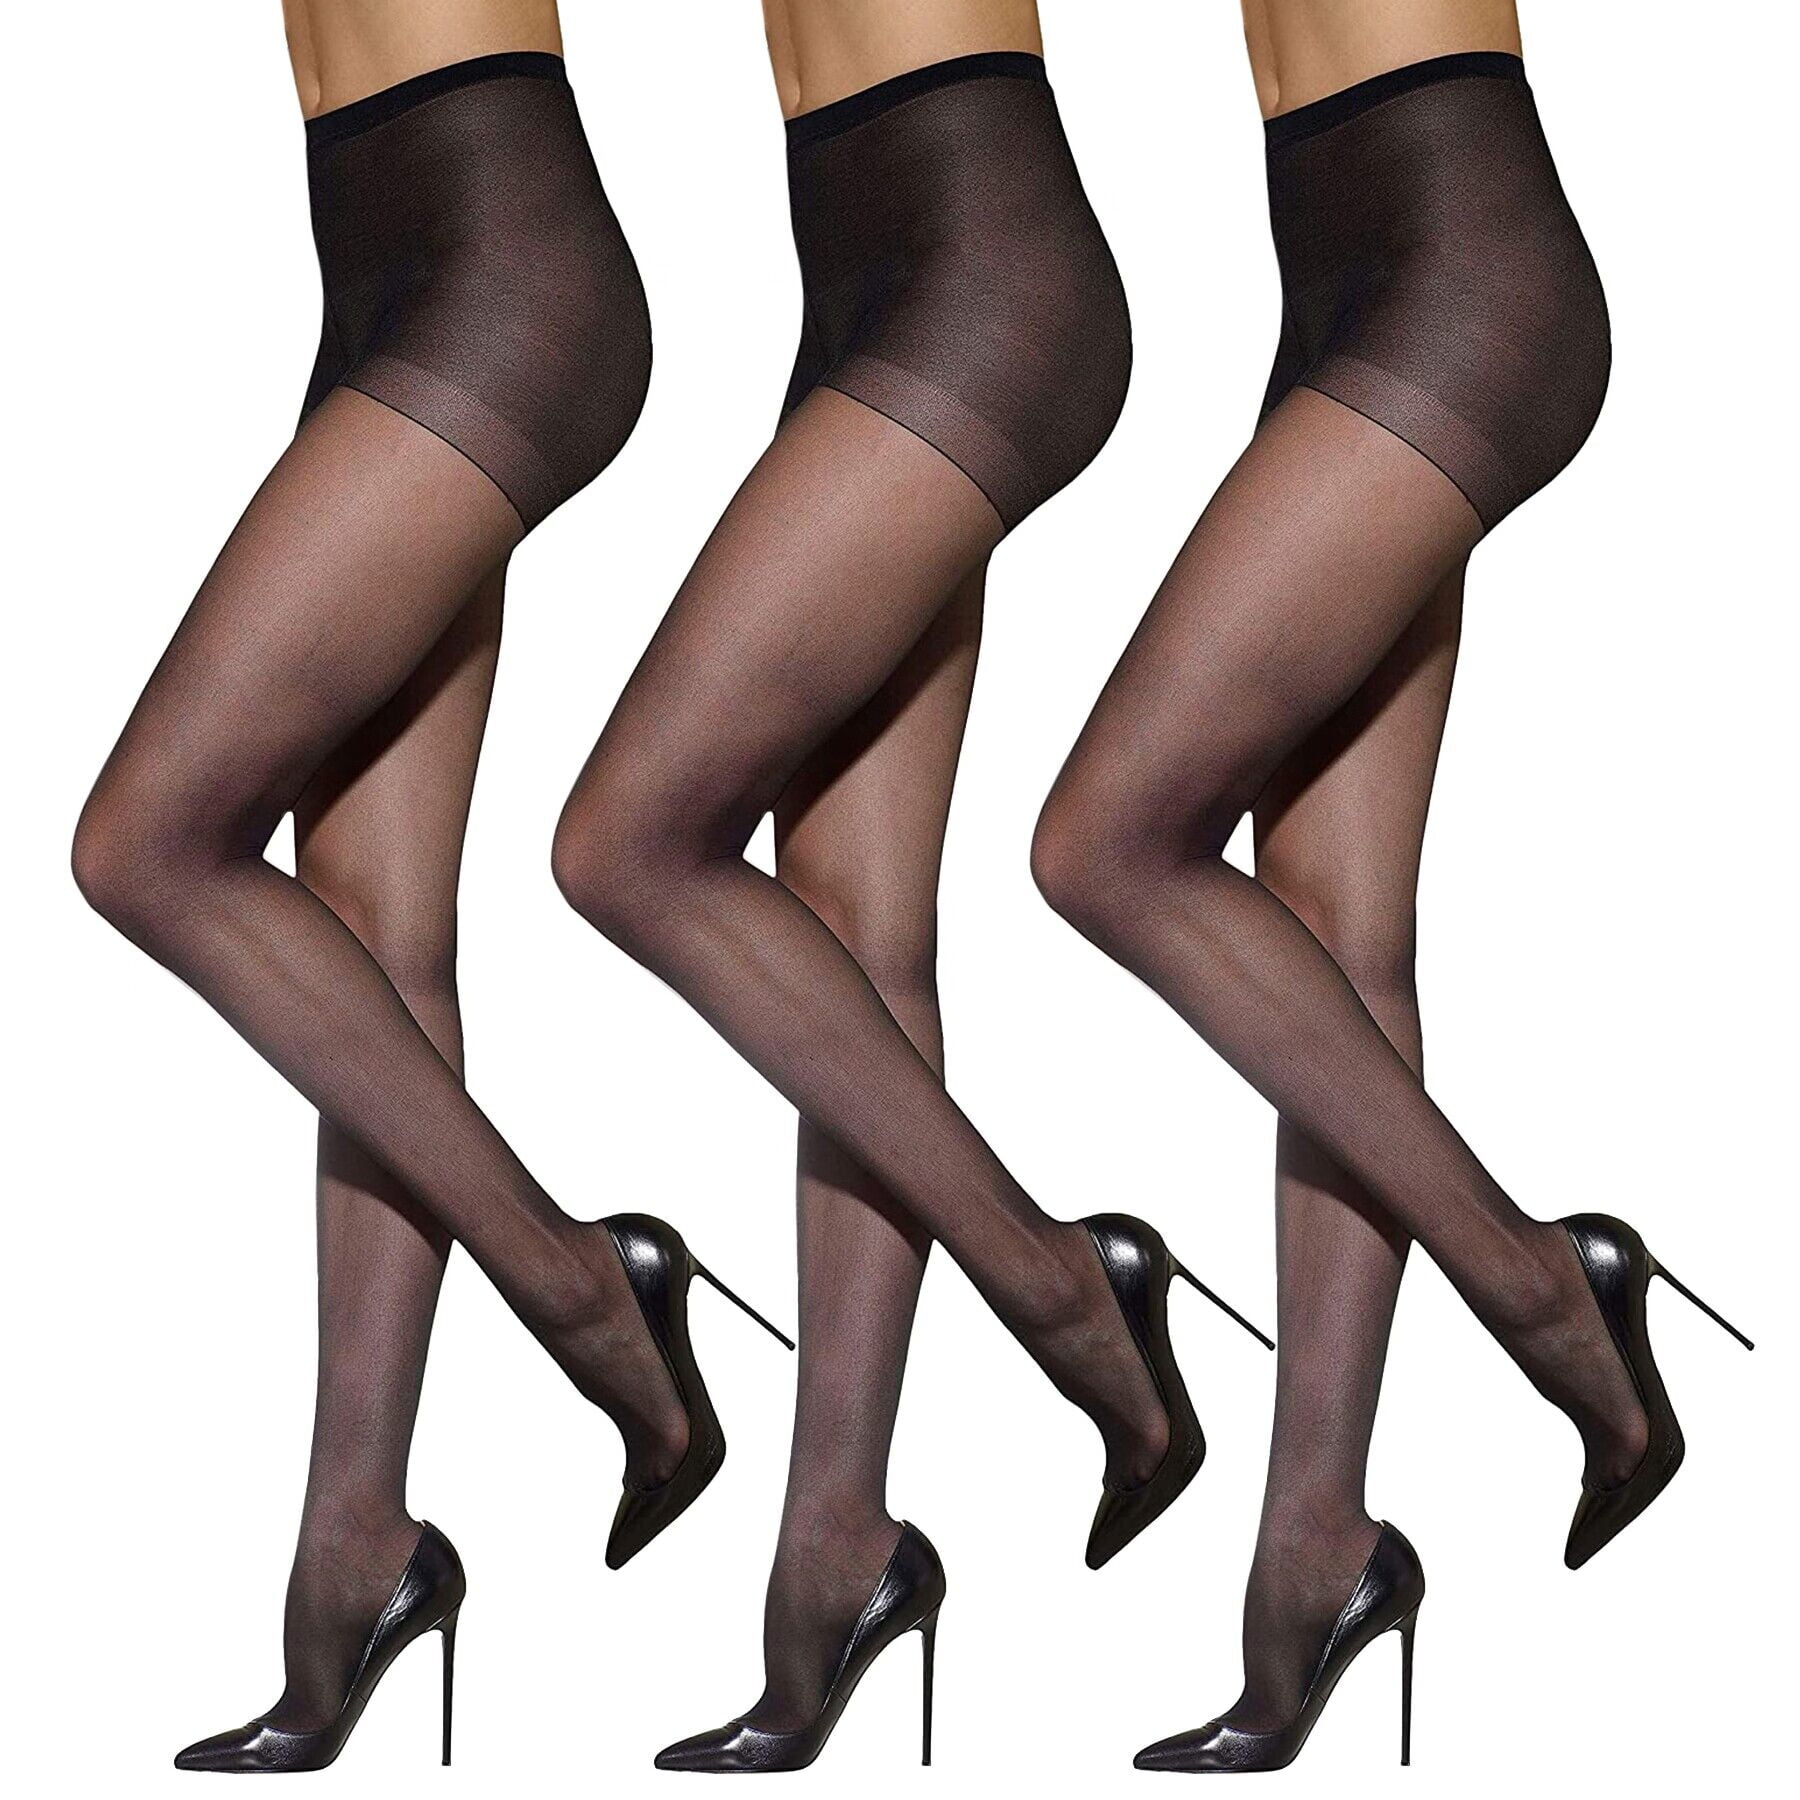 Buy NanoEdge Black Tights for Women Top Control ? Free Size (28 till 34)  Den Pantyhose Pack of 1 at